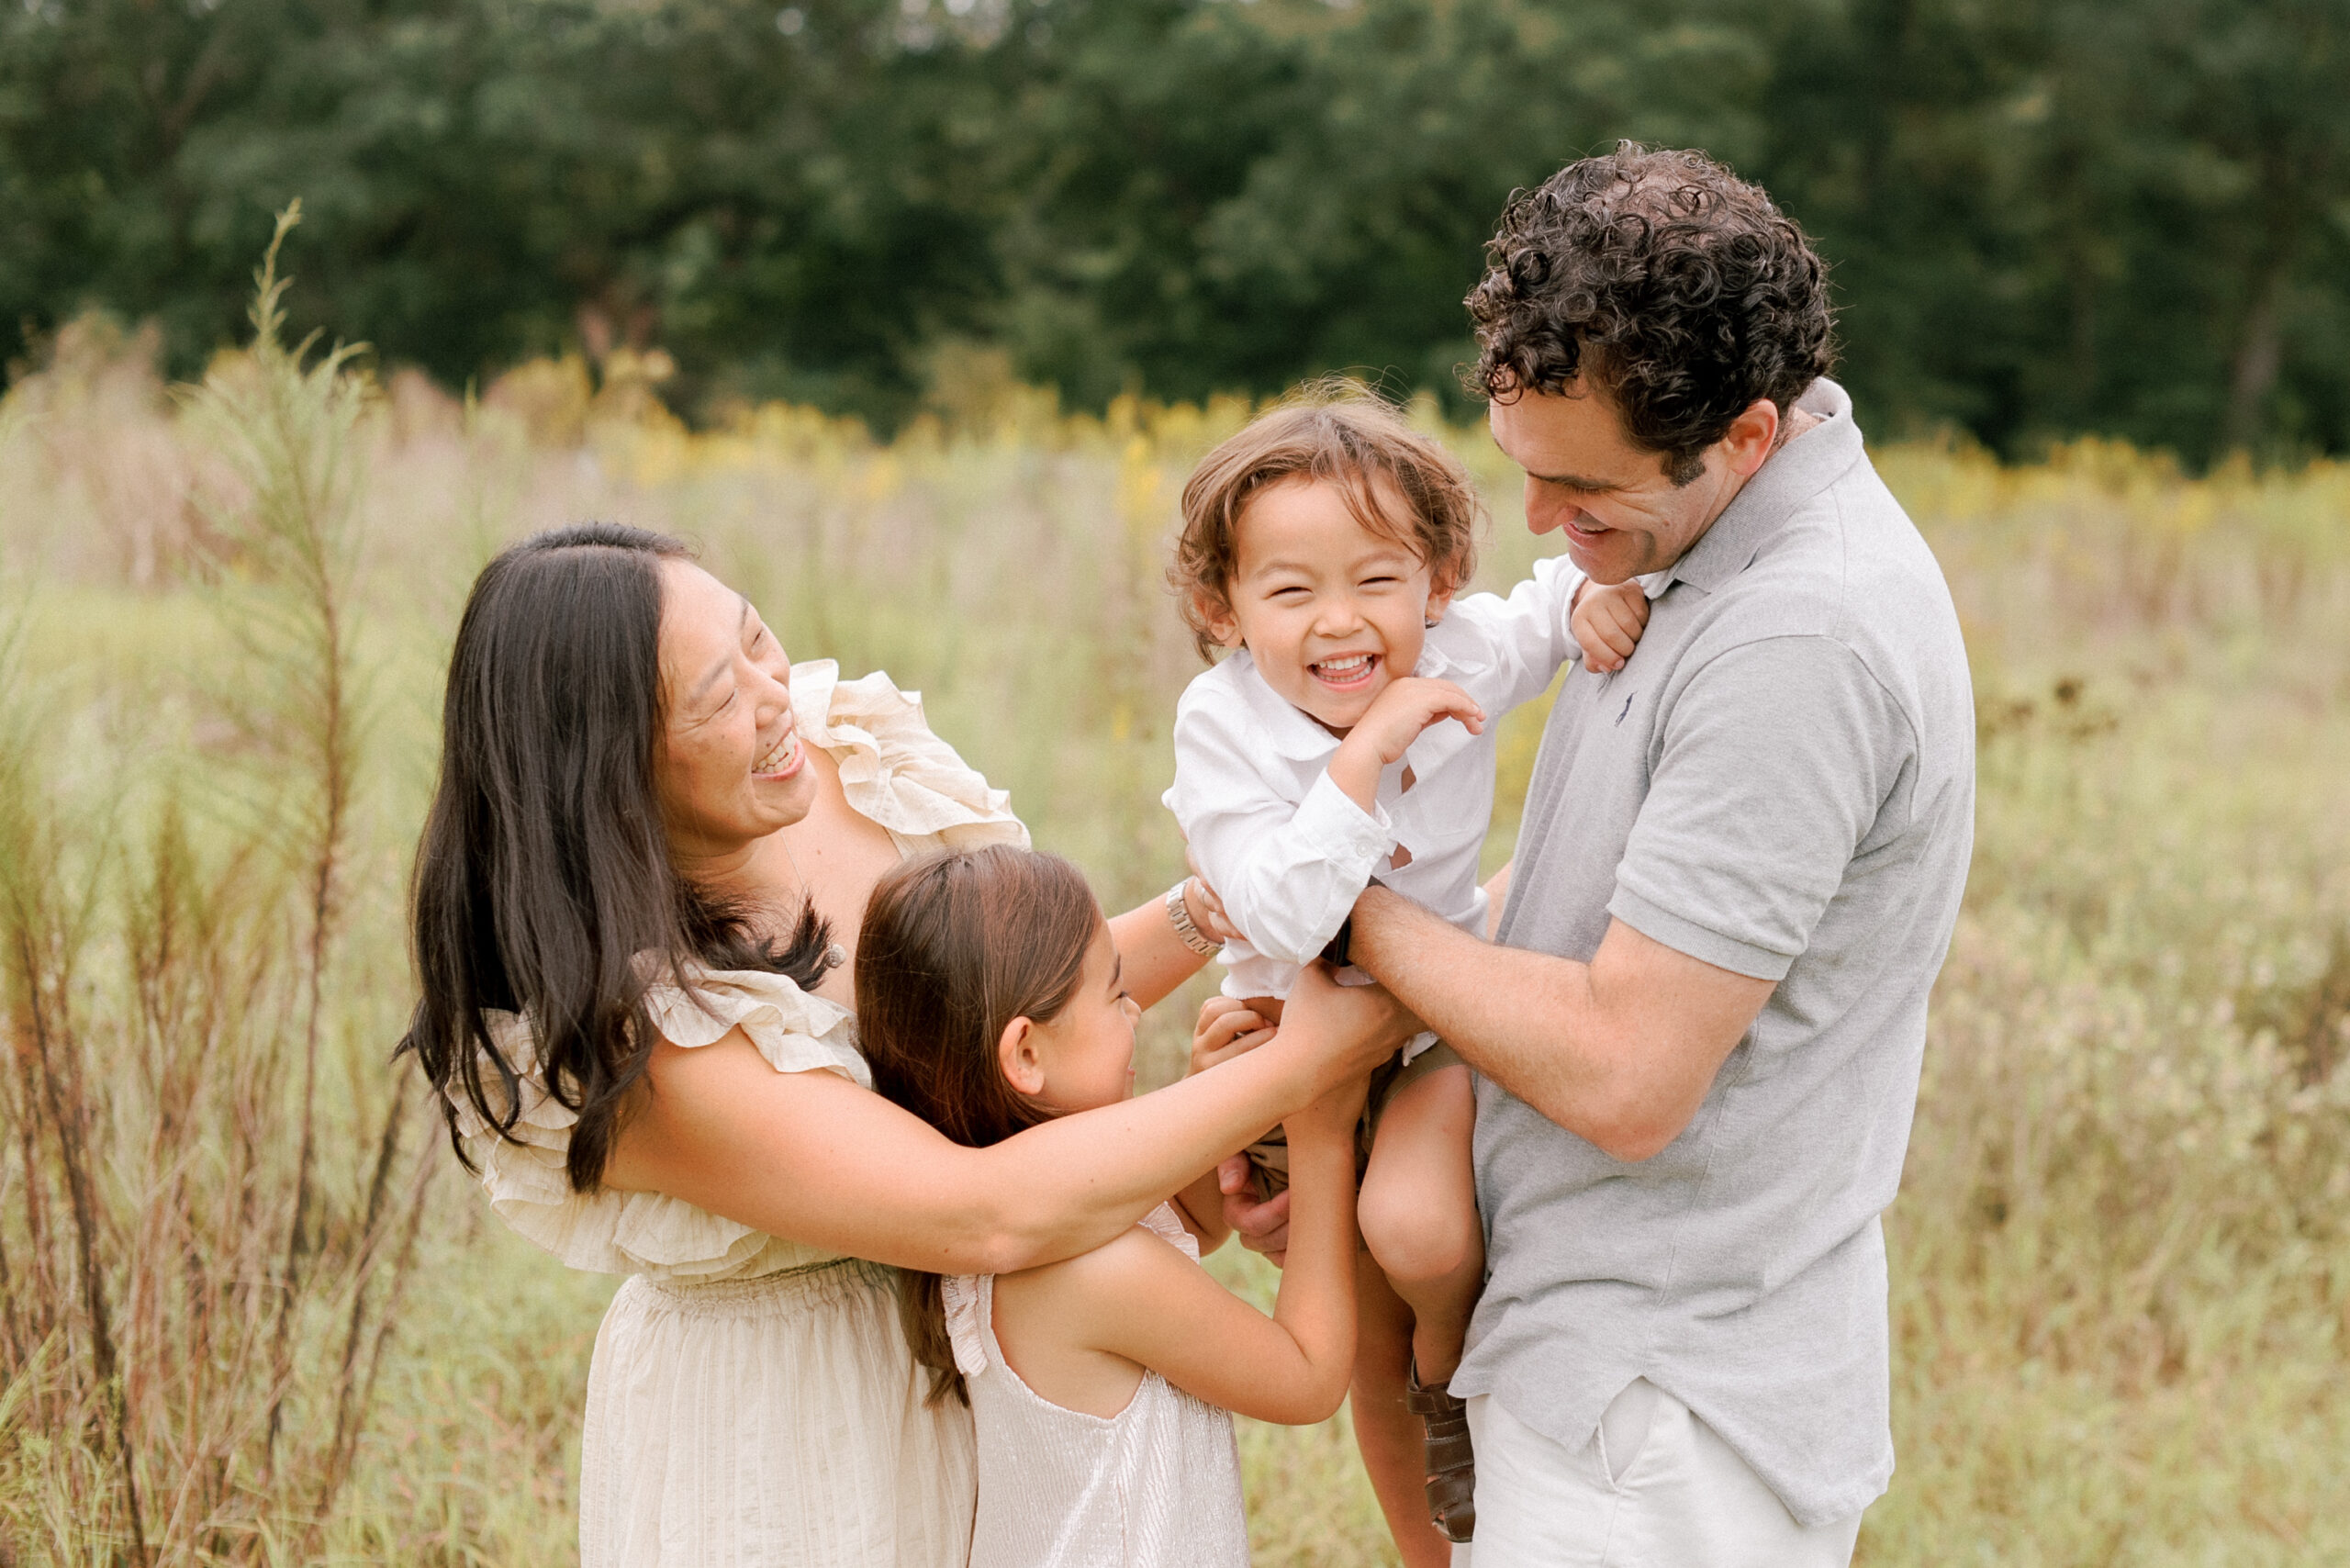 We're sharing our tips and tricks for getting the most out of your family photography. Learn from our years of experience as Raleigh family photographers!